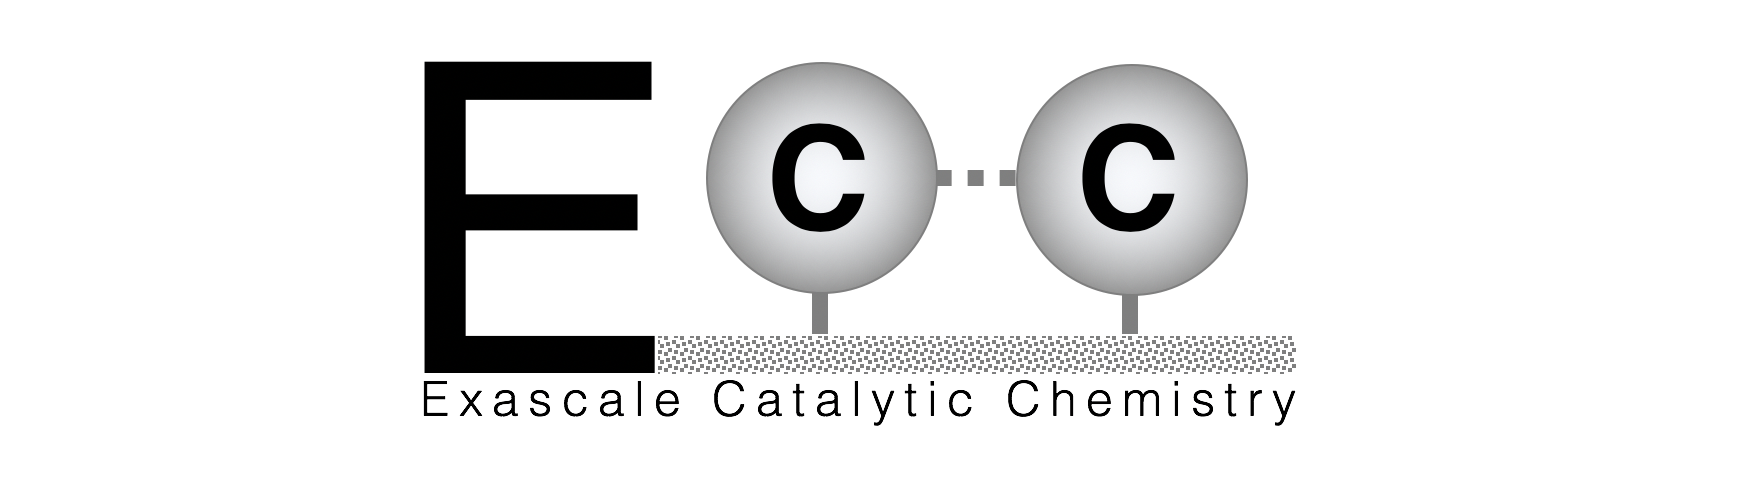 Exascale Catalytic Chemistry (ECC) Project